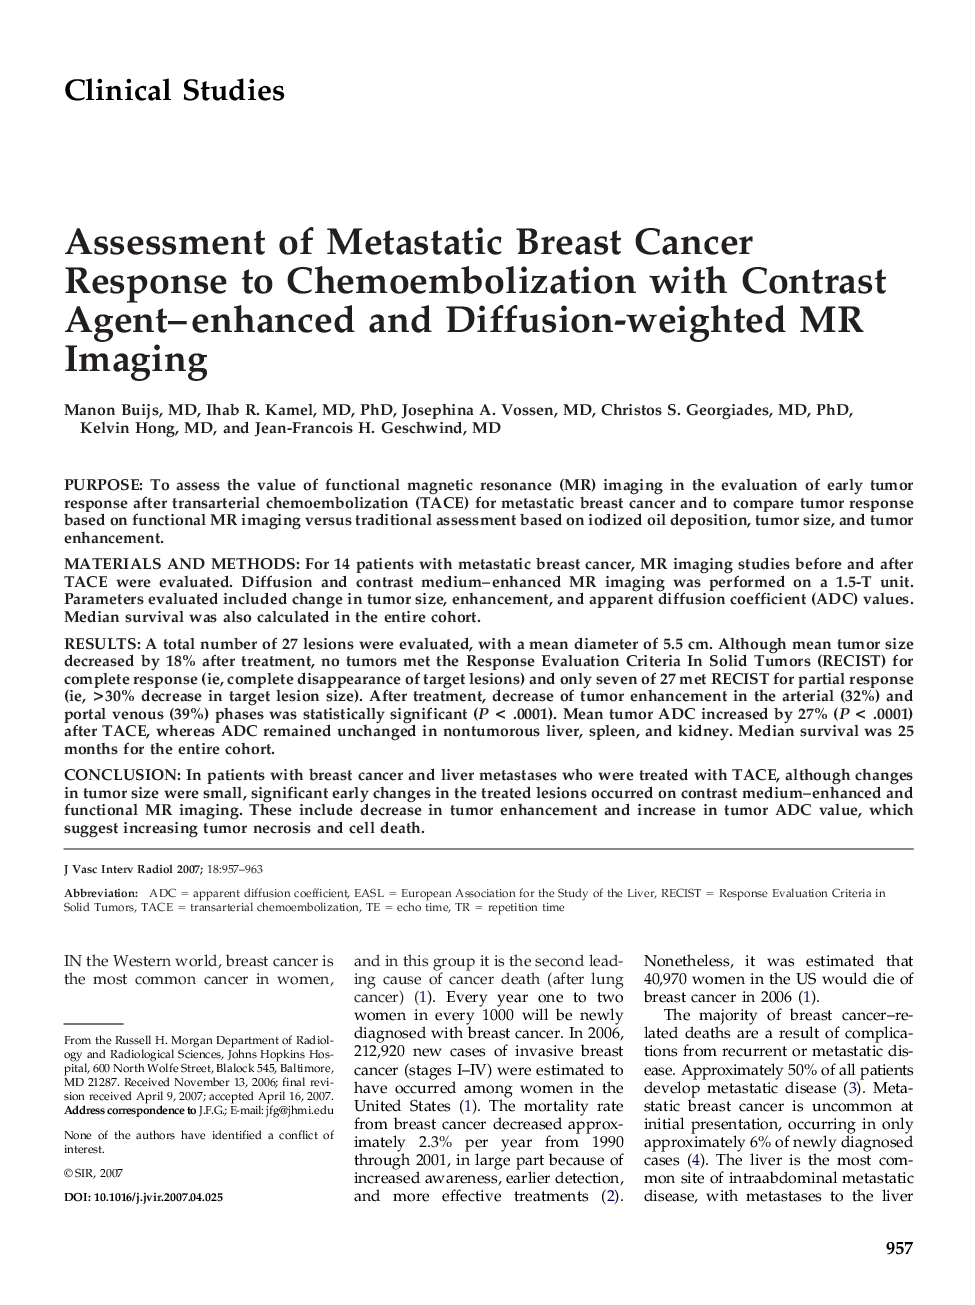 Assessment of Metastatic Breast Cancer Response to Chemoembolization with Contrast Agent-enhanced and Diffusion-weighted MR Imaging